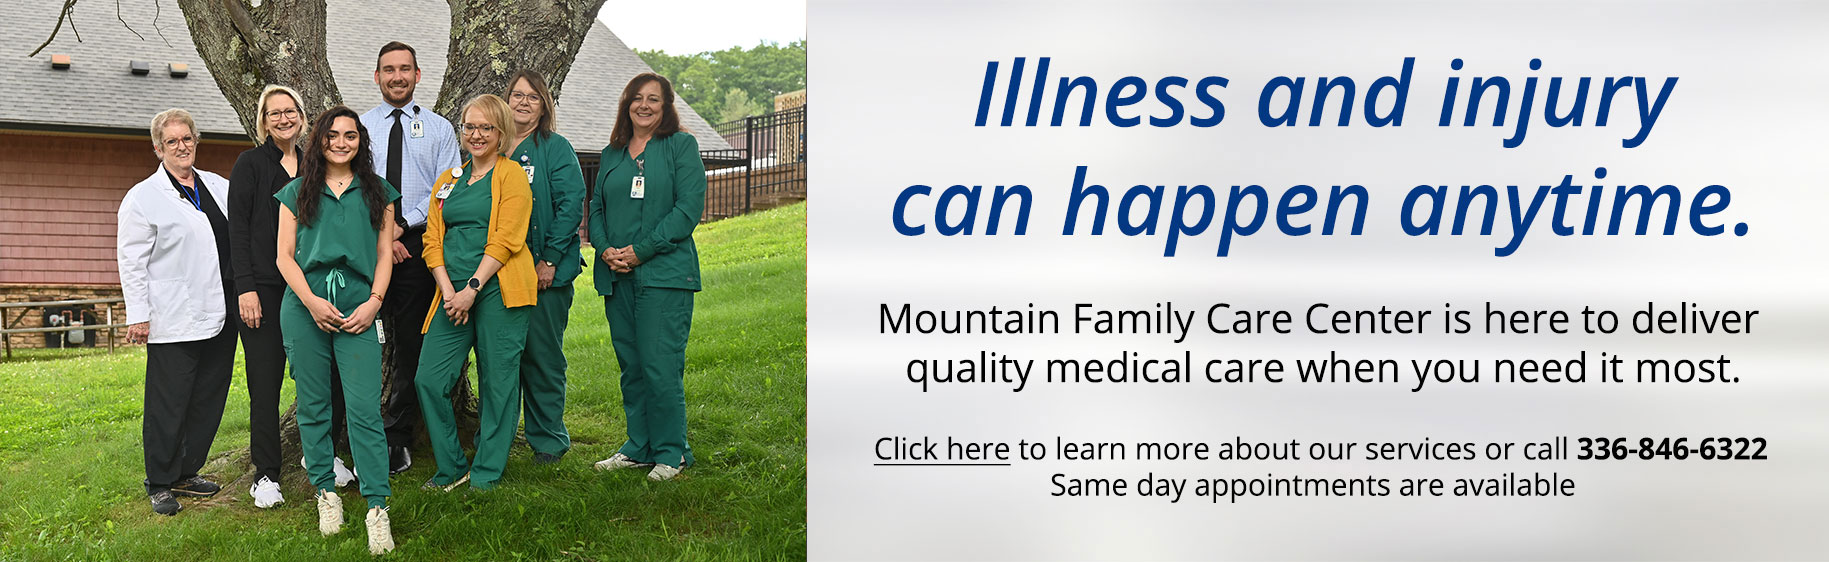 Illness and injury can happen anytime.
Mountain Family Care Center is here to deliver quality medical care when you need it most.

Click here to learn more about our services or call 336-846-6322
Same day appointments are available